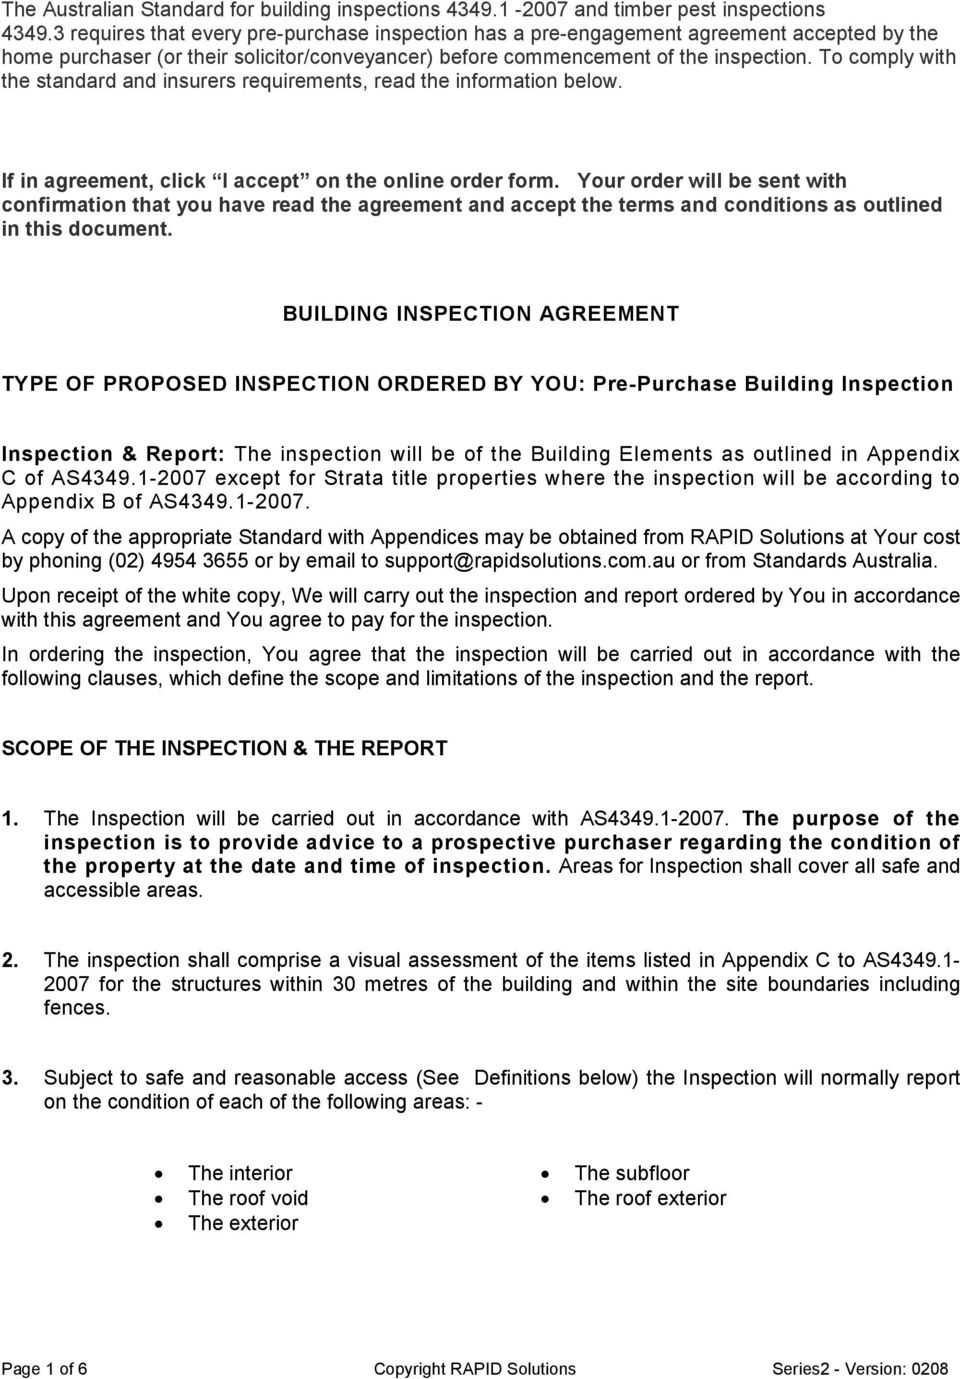 Building Inspection Agreement. Type Of Proposed Inspection Regarding Pre Purchase Building Inspection Report Template